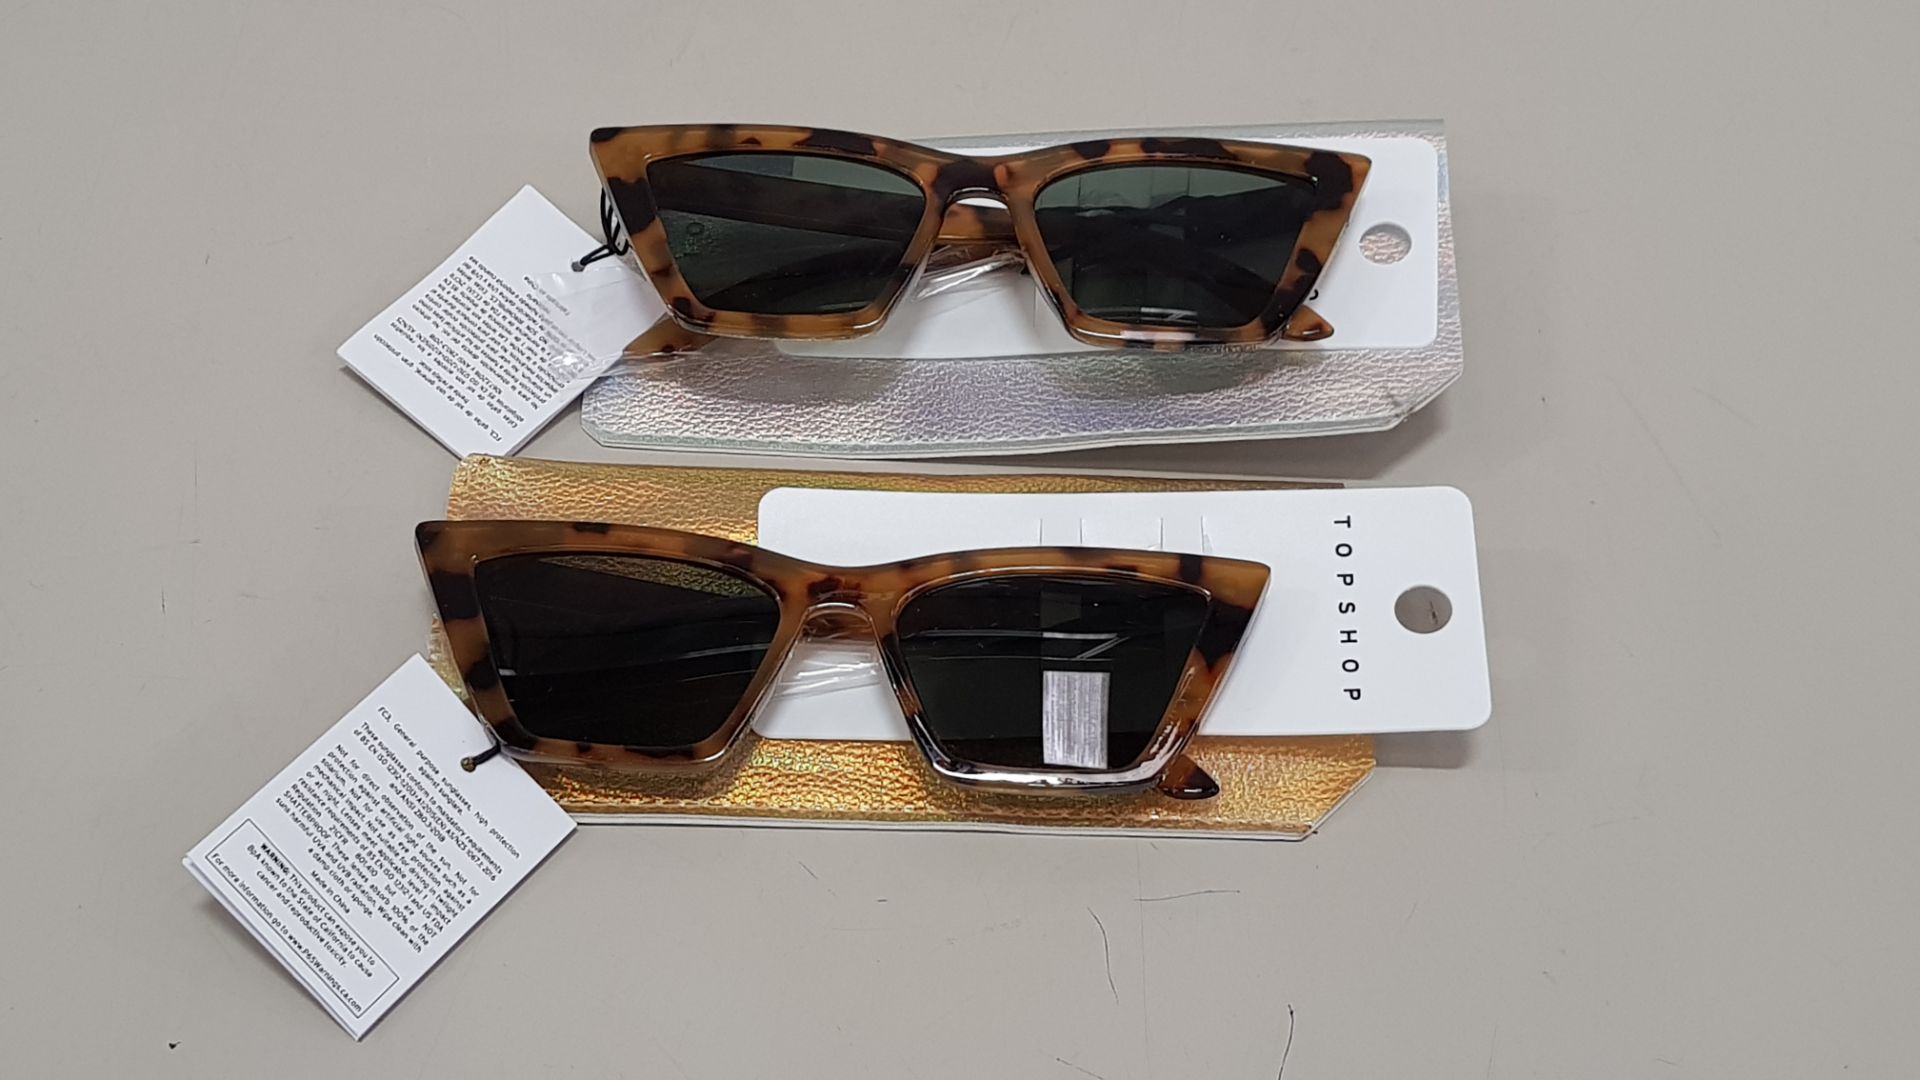 40 X BRAND NEW PACKS OF 2 TOPSHOP SUNGLASSES - IN TORTOISE SHELL DESIGN WITH SLEEVES RRP £14 EACH